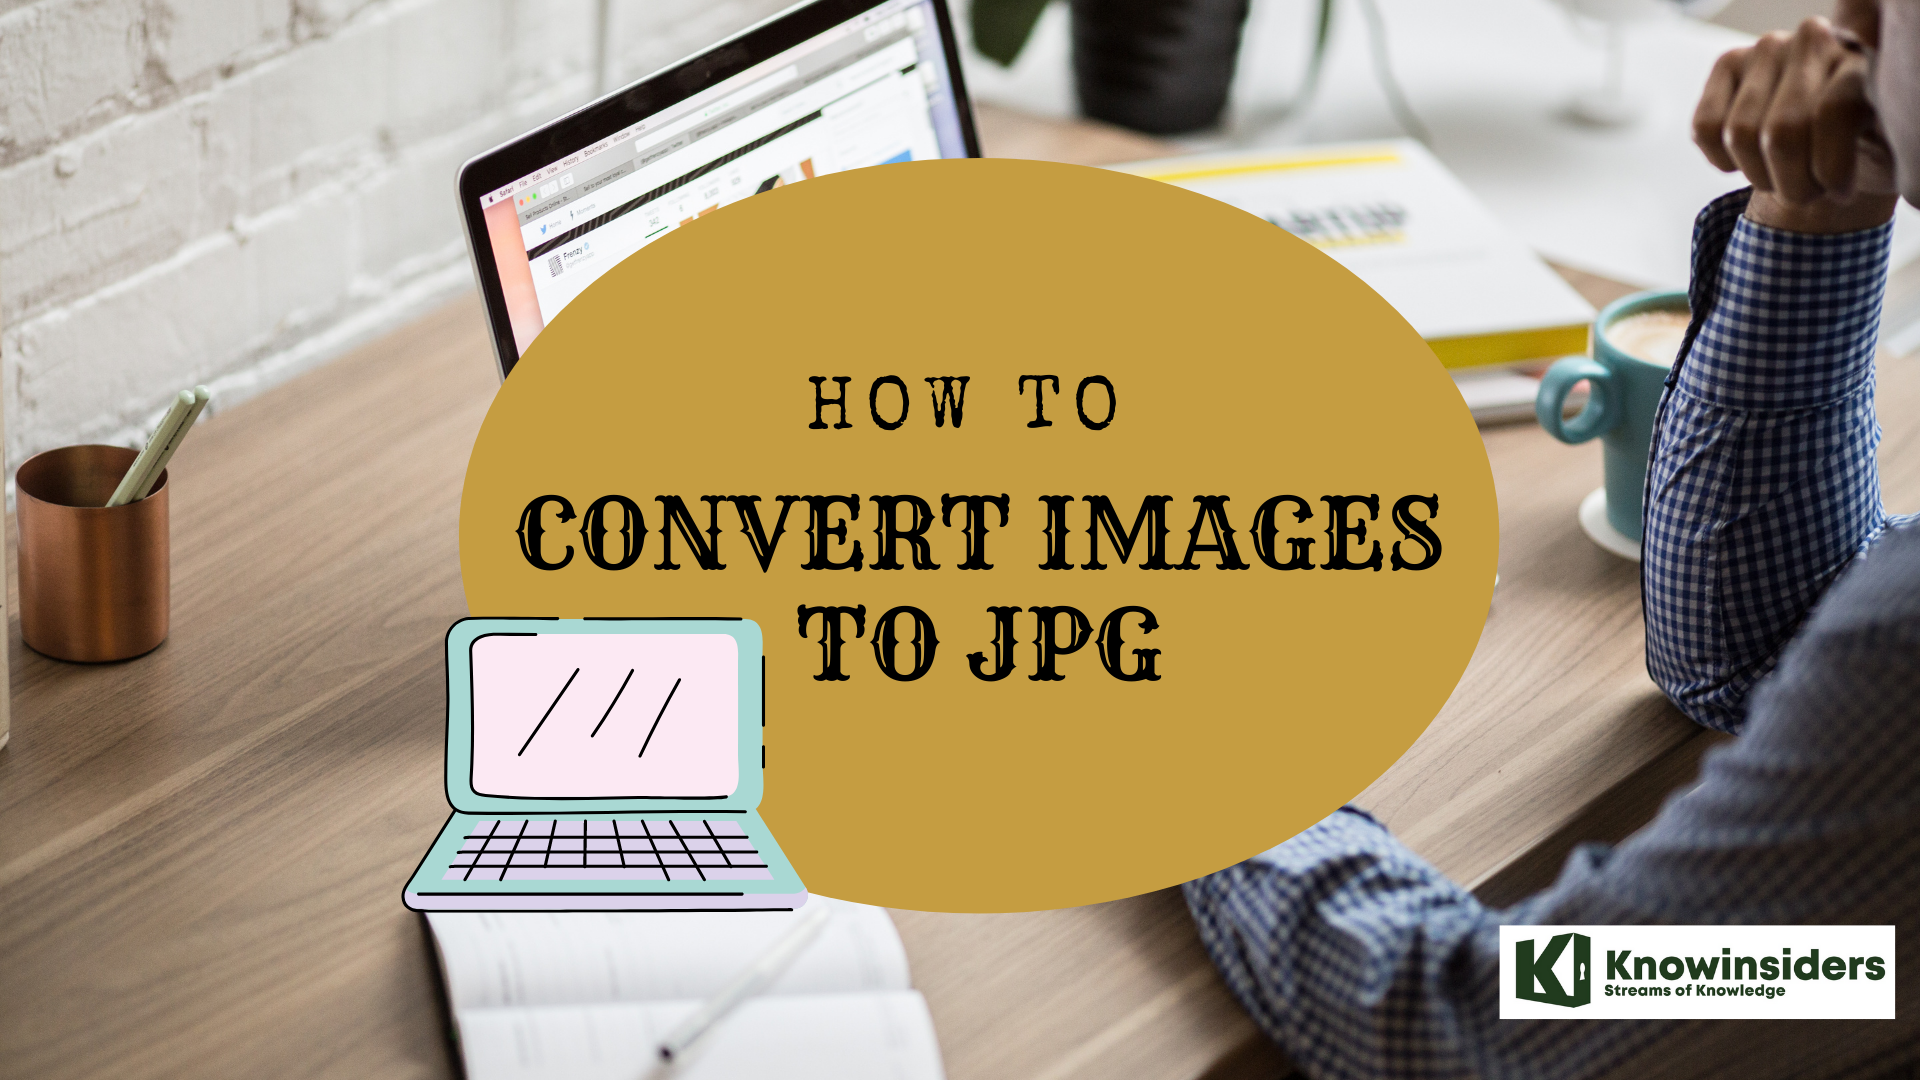 How to convert images to JPG